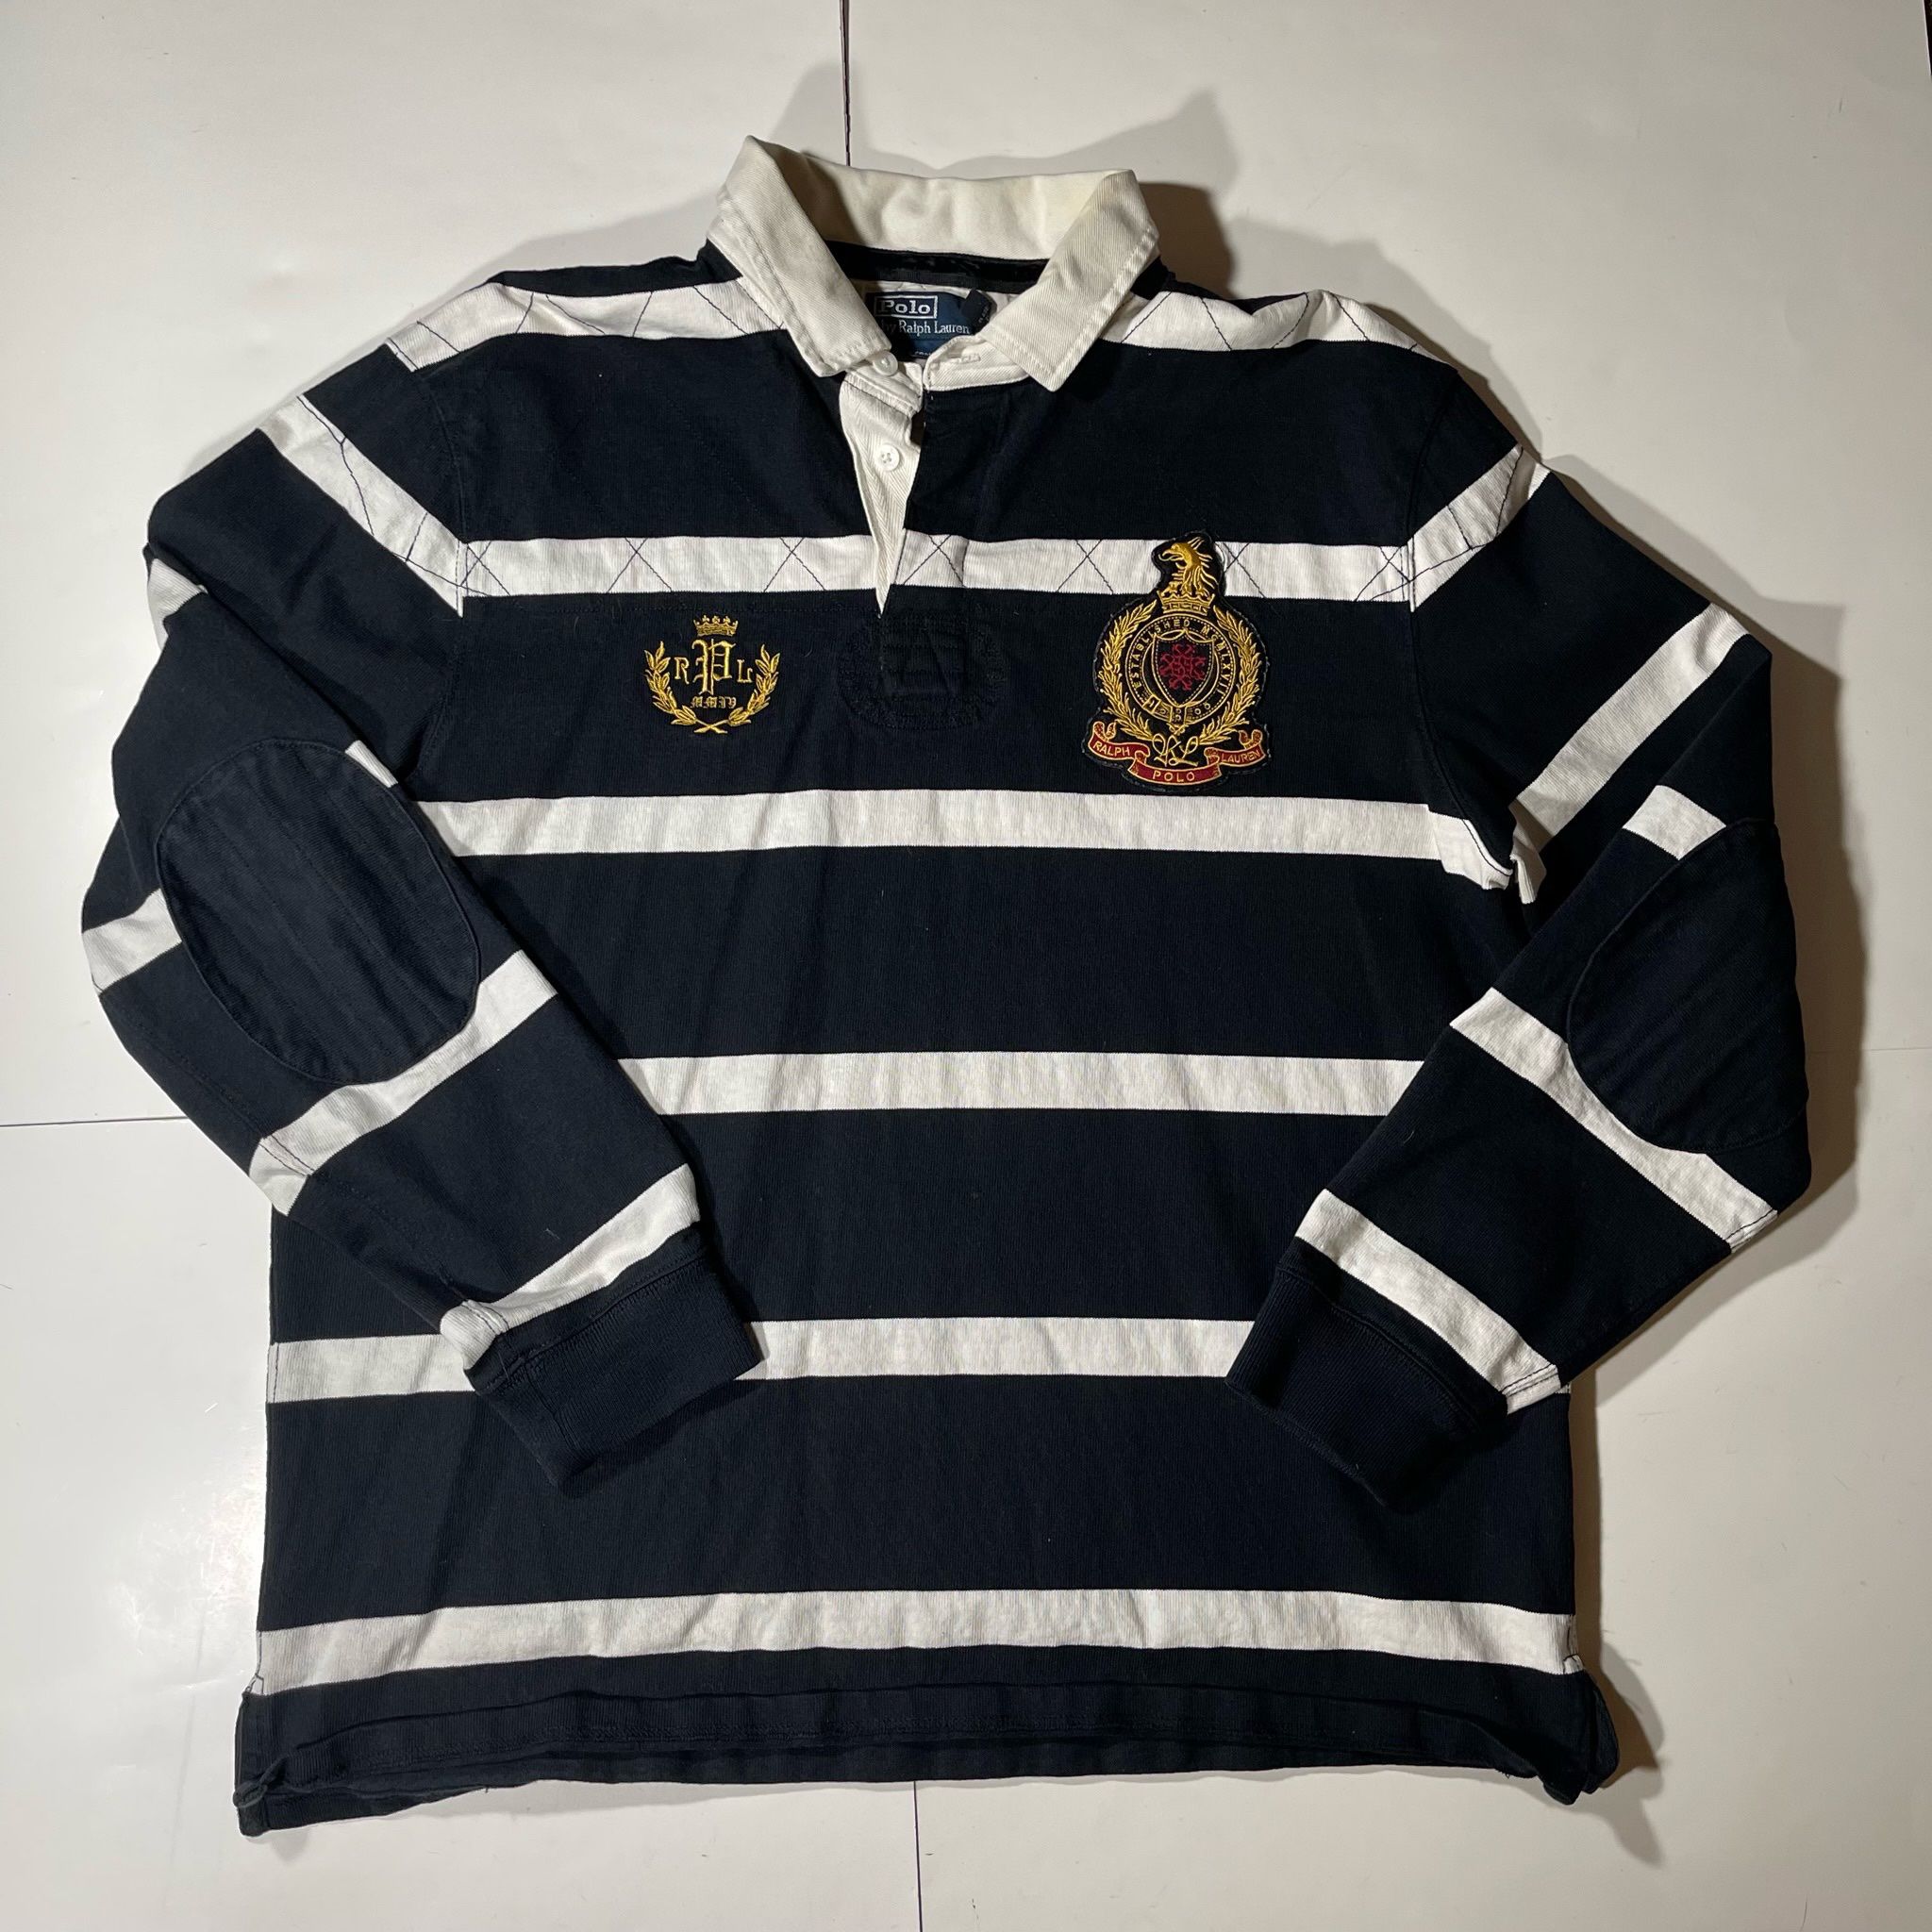 VINTAGE POLO BLACK WHITE STRIPED RUGBY SHIRT MENS 2XL LONG SLEEVE for Sale in Agua Dulce, CA - OfferUp